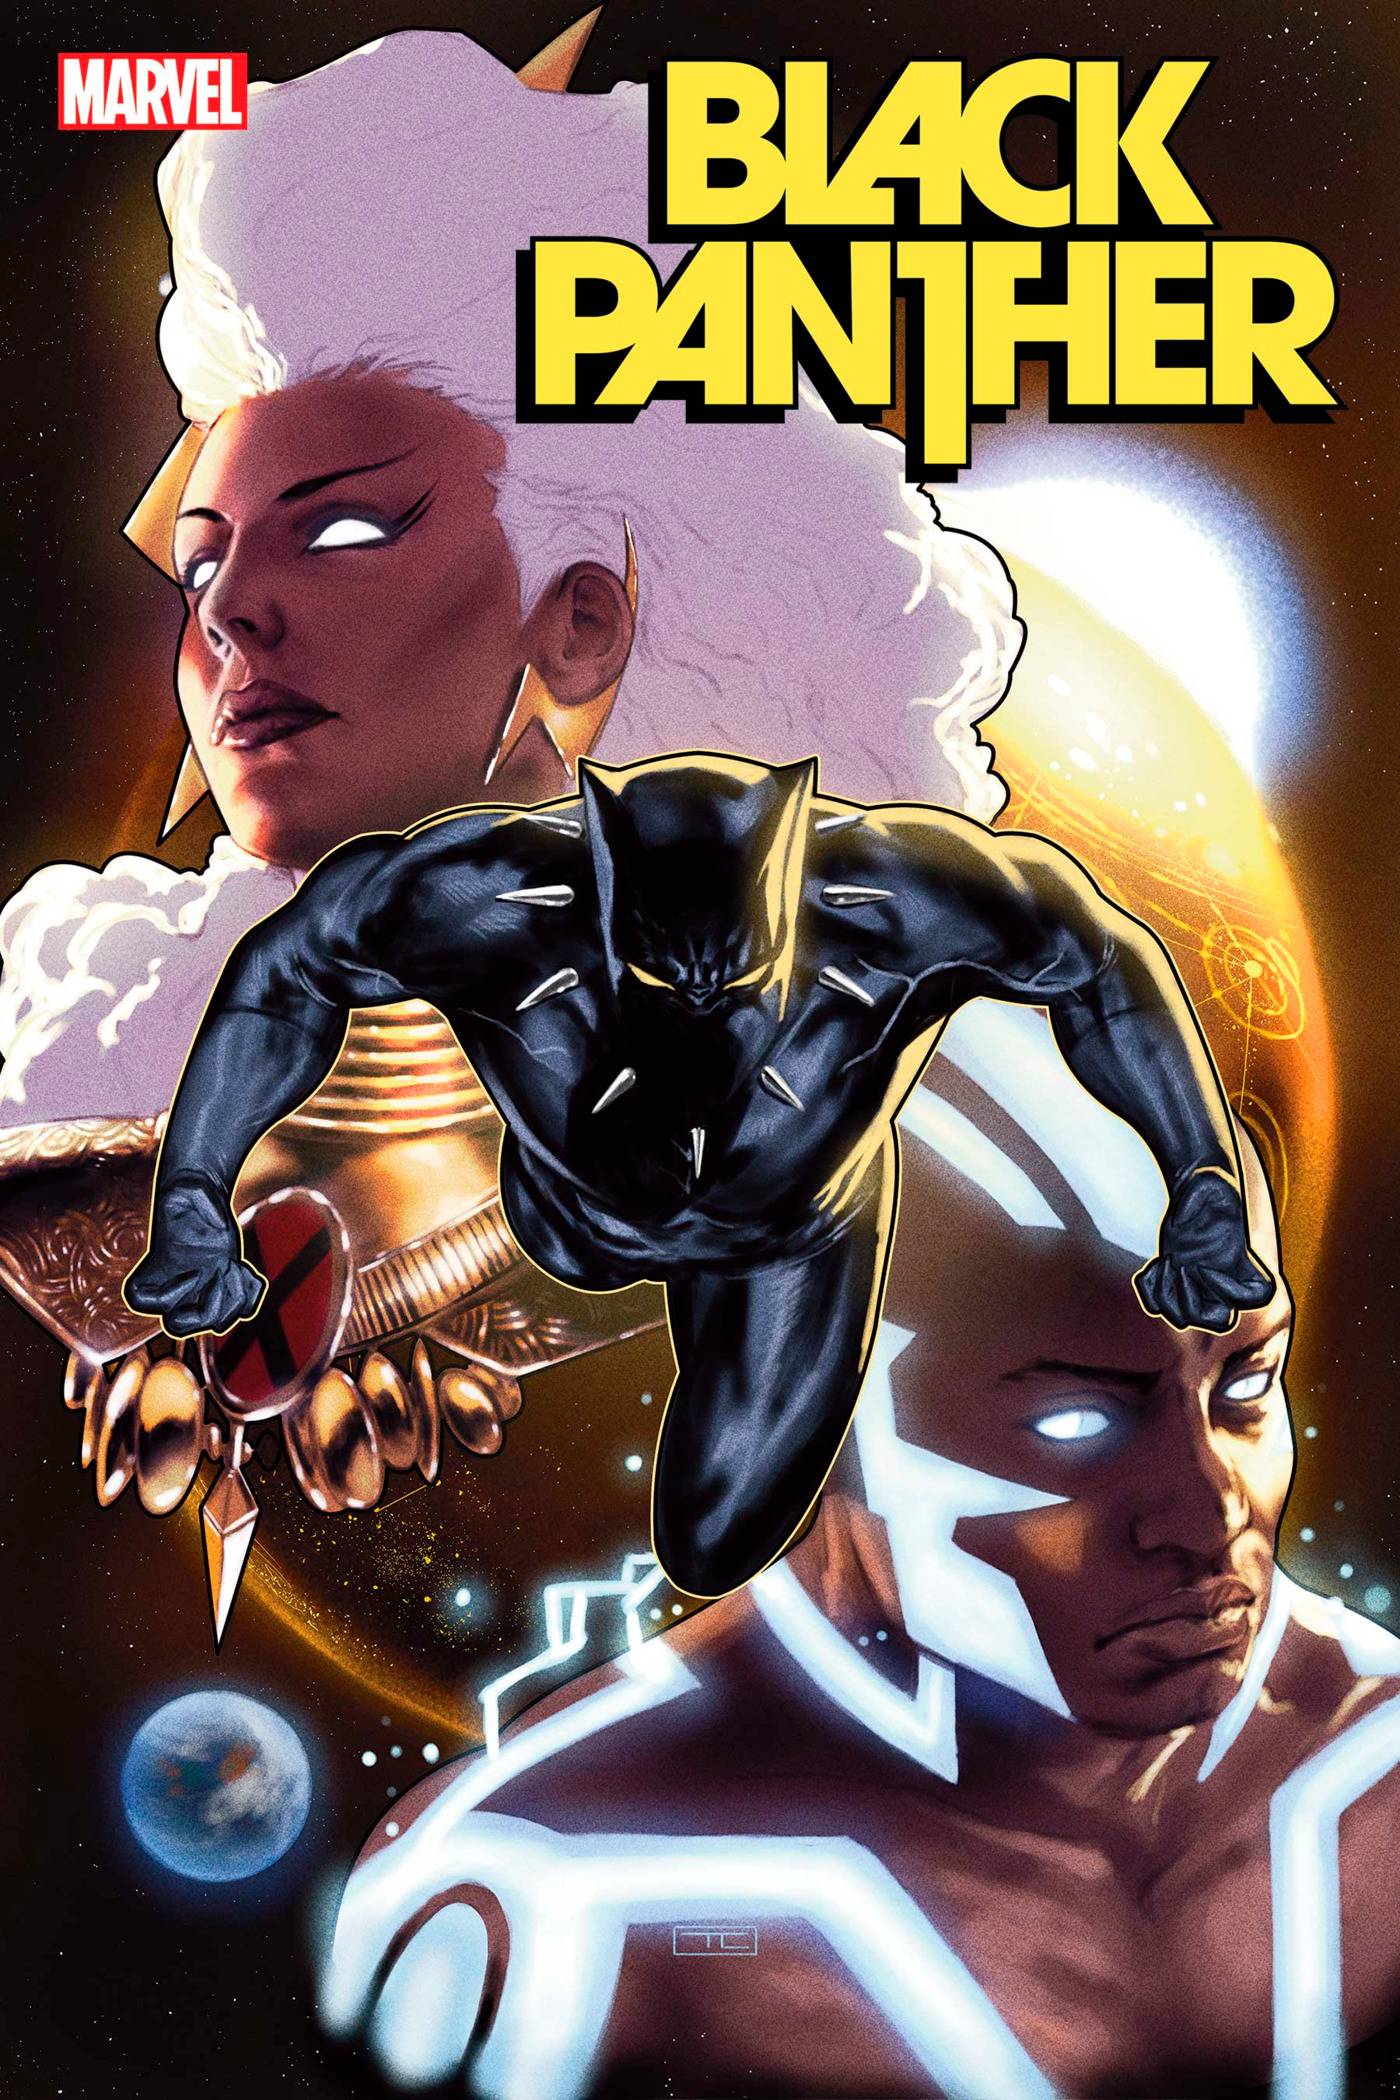 01/26/2022 BLACK PANTHER #3 CLARKE 1:25 RARE VARIANT 1ST APPEARANCE OF TOSIN ODUYE